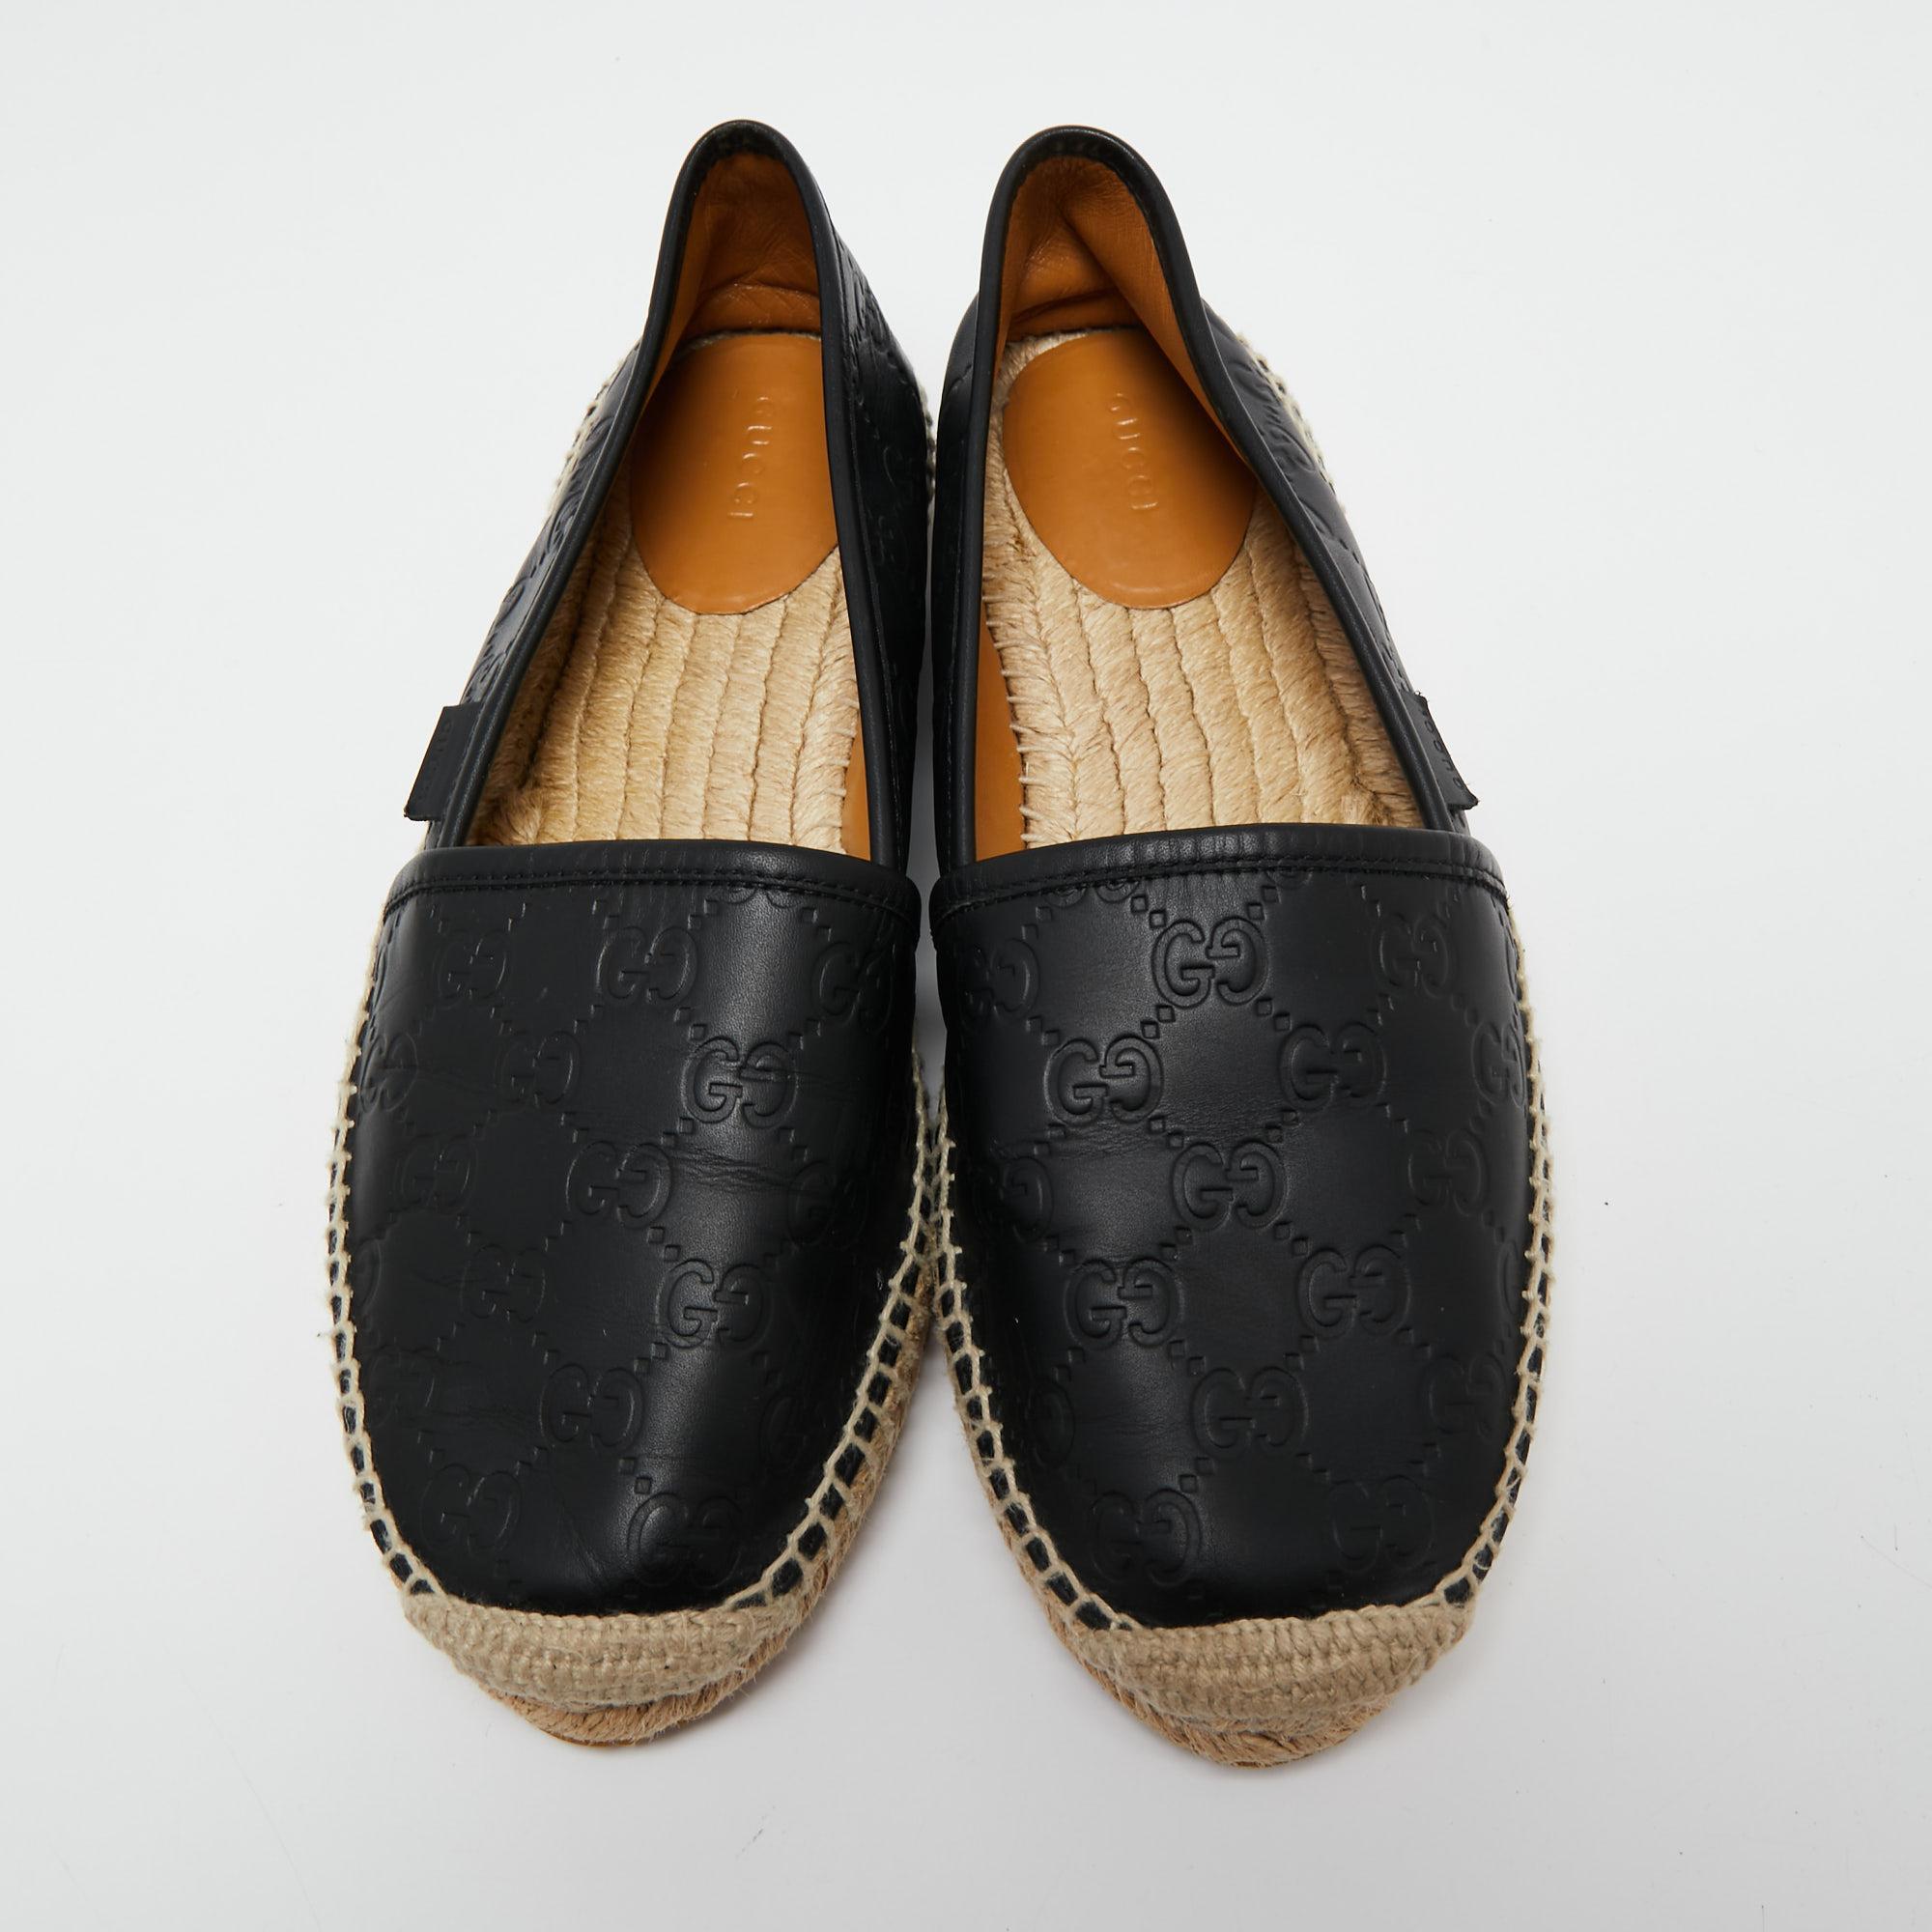 These Gucci espadrille flats are a summer staple you will love wearing again and again. Formed using leather, they have the Guccissima embossing all over and are set on hand-crafted soles.

